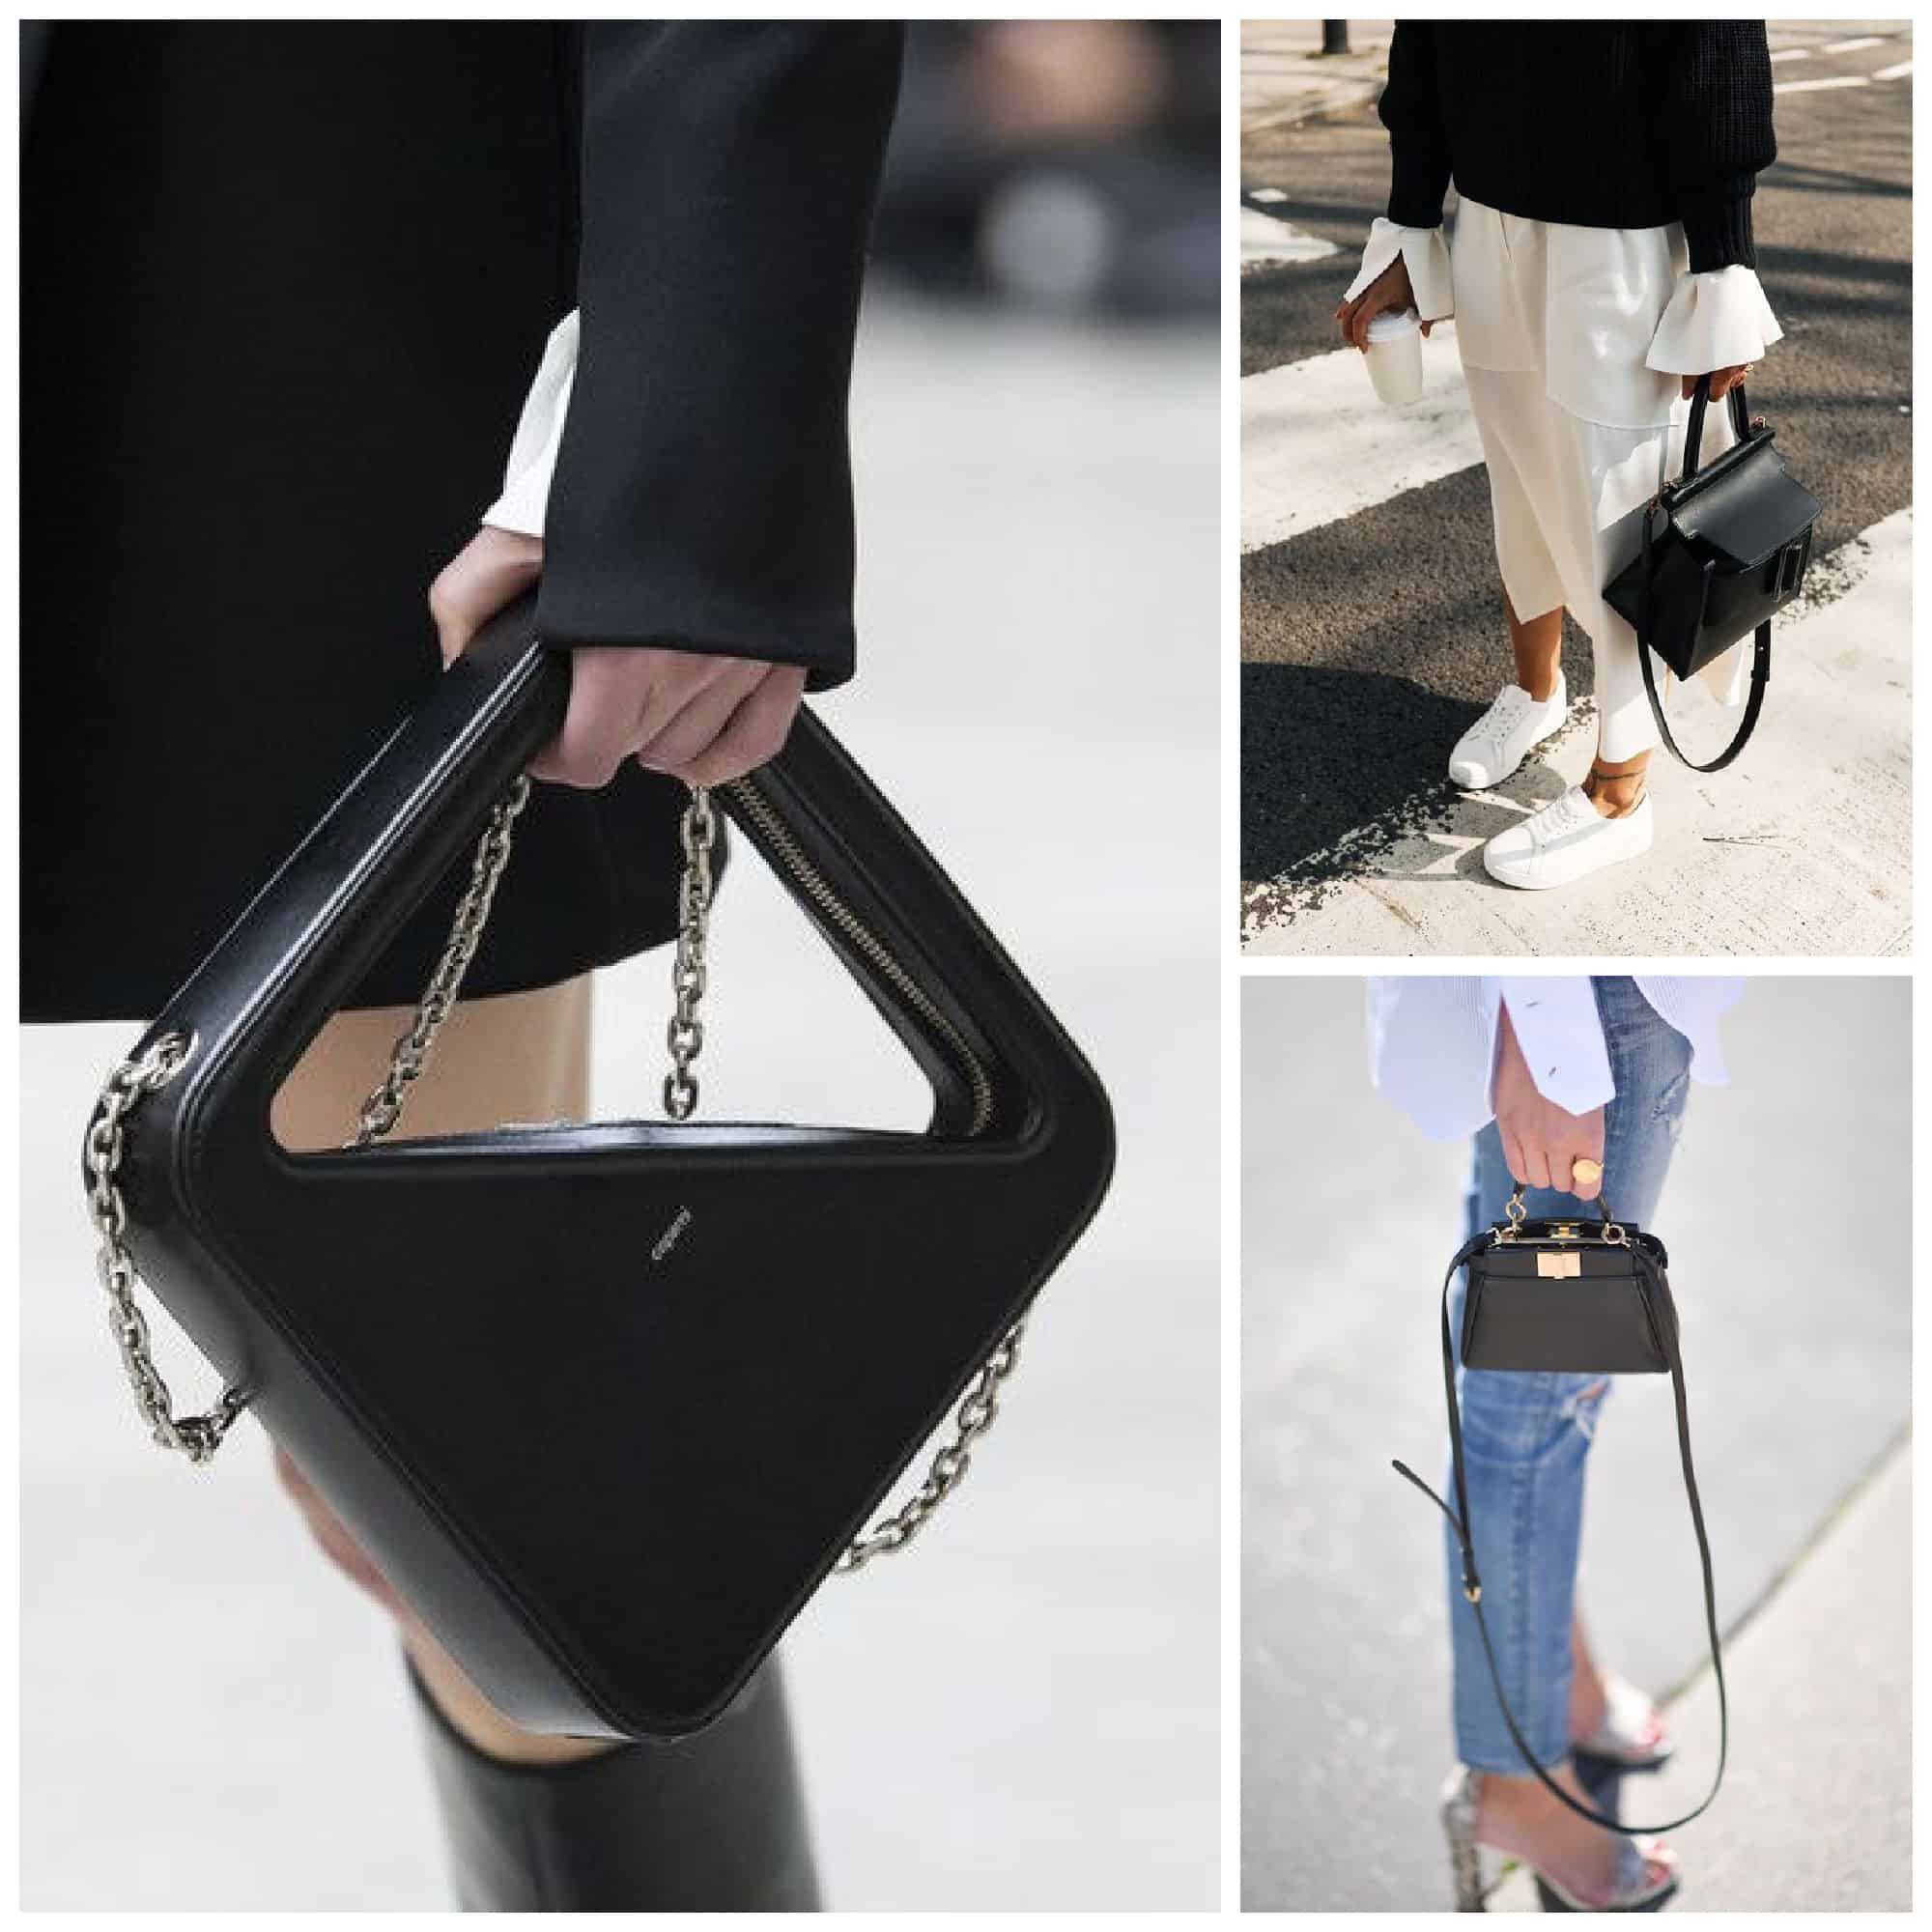 6 classic men's bags that will never go out of style